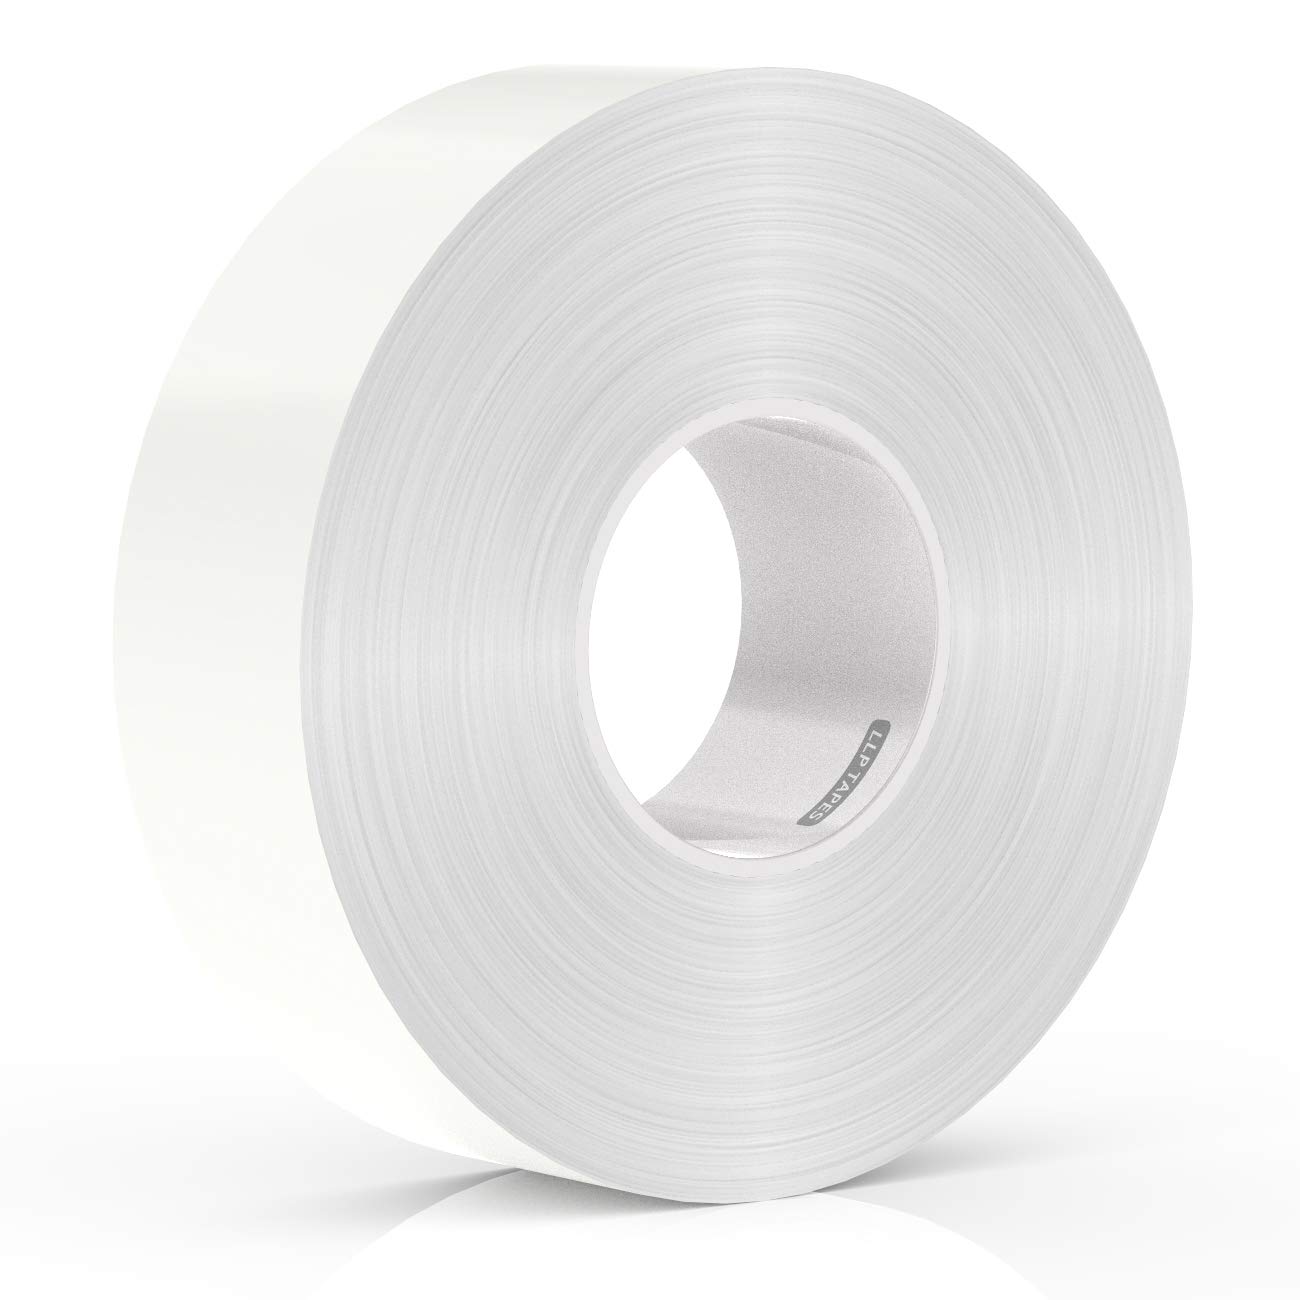 LLP17120588B LLPT Double Sided White Woodworking Tape 2 Inches x 60 Feet  for CNC Machining Wood Templates Removable Residue Free Very Strong